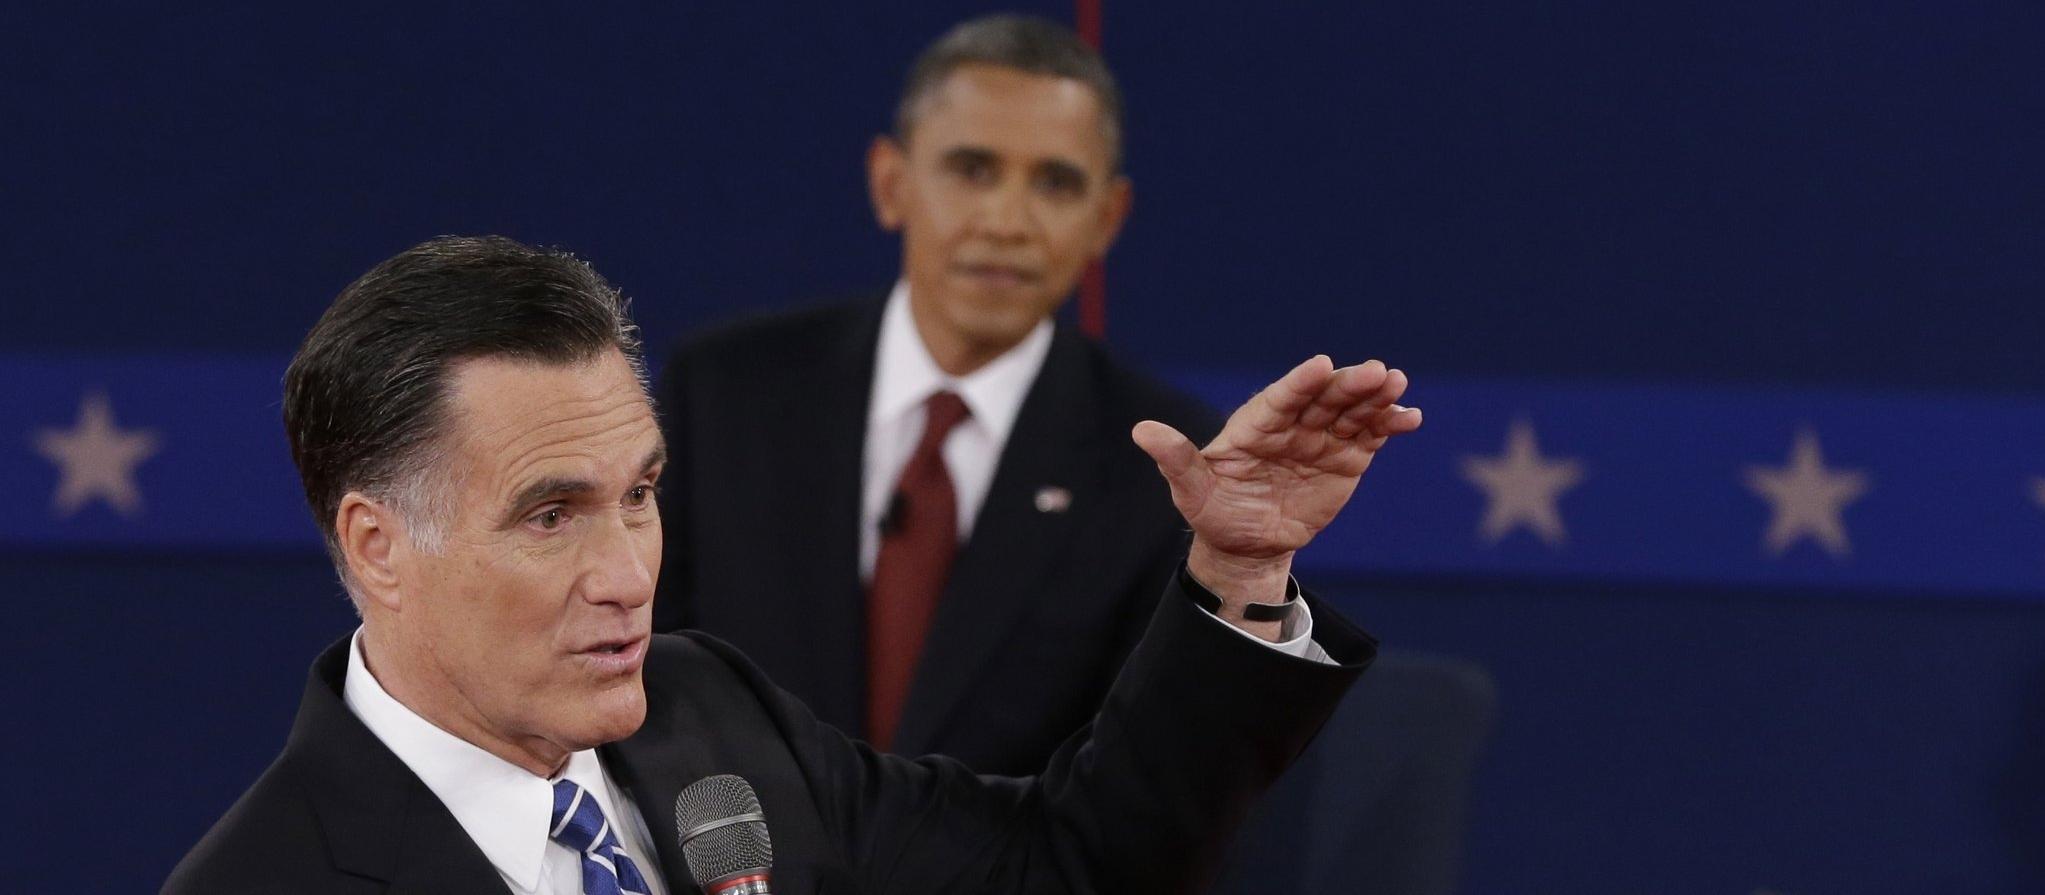 Mittens and Hussein debate in 2012